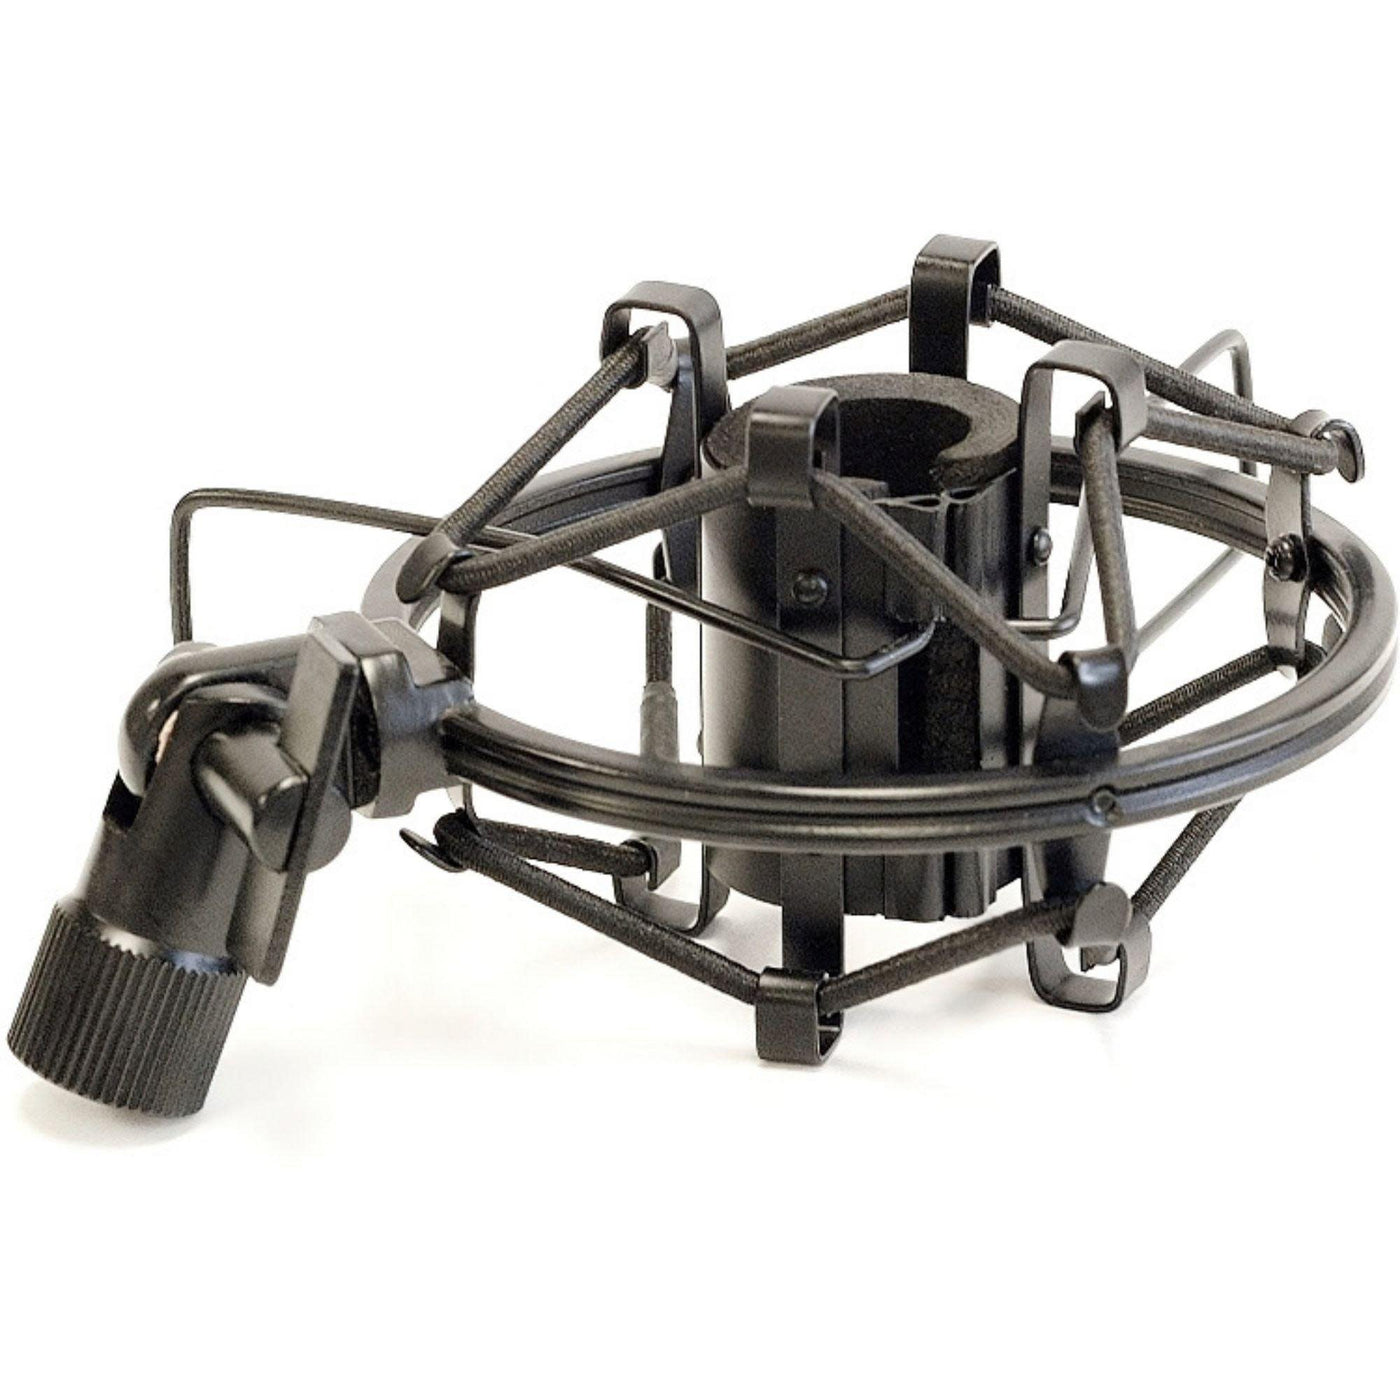 MXL-41-603 SDC Shock Mount for 603, V67N, and 991 Microphones